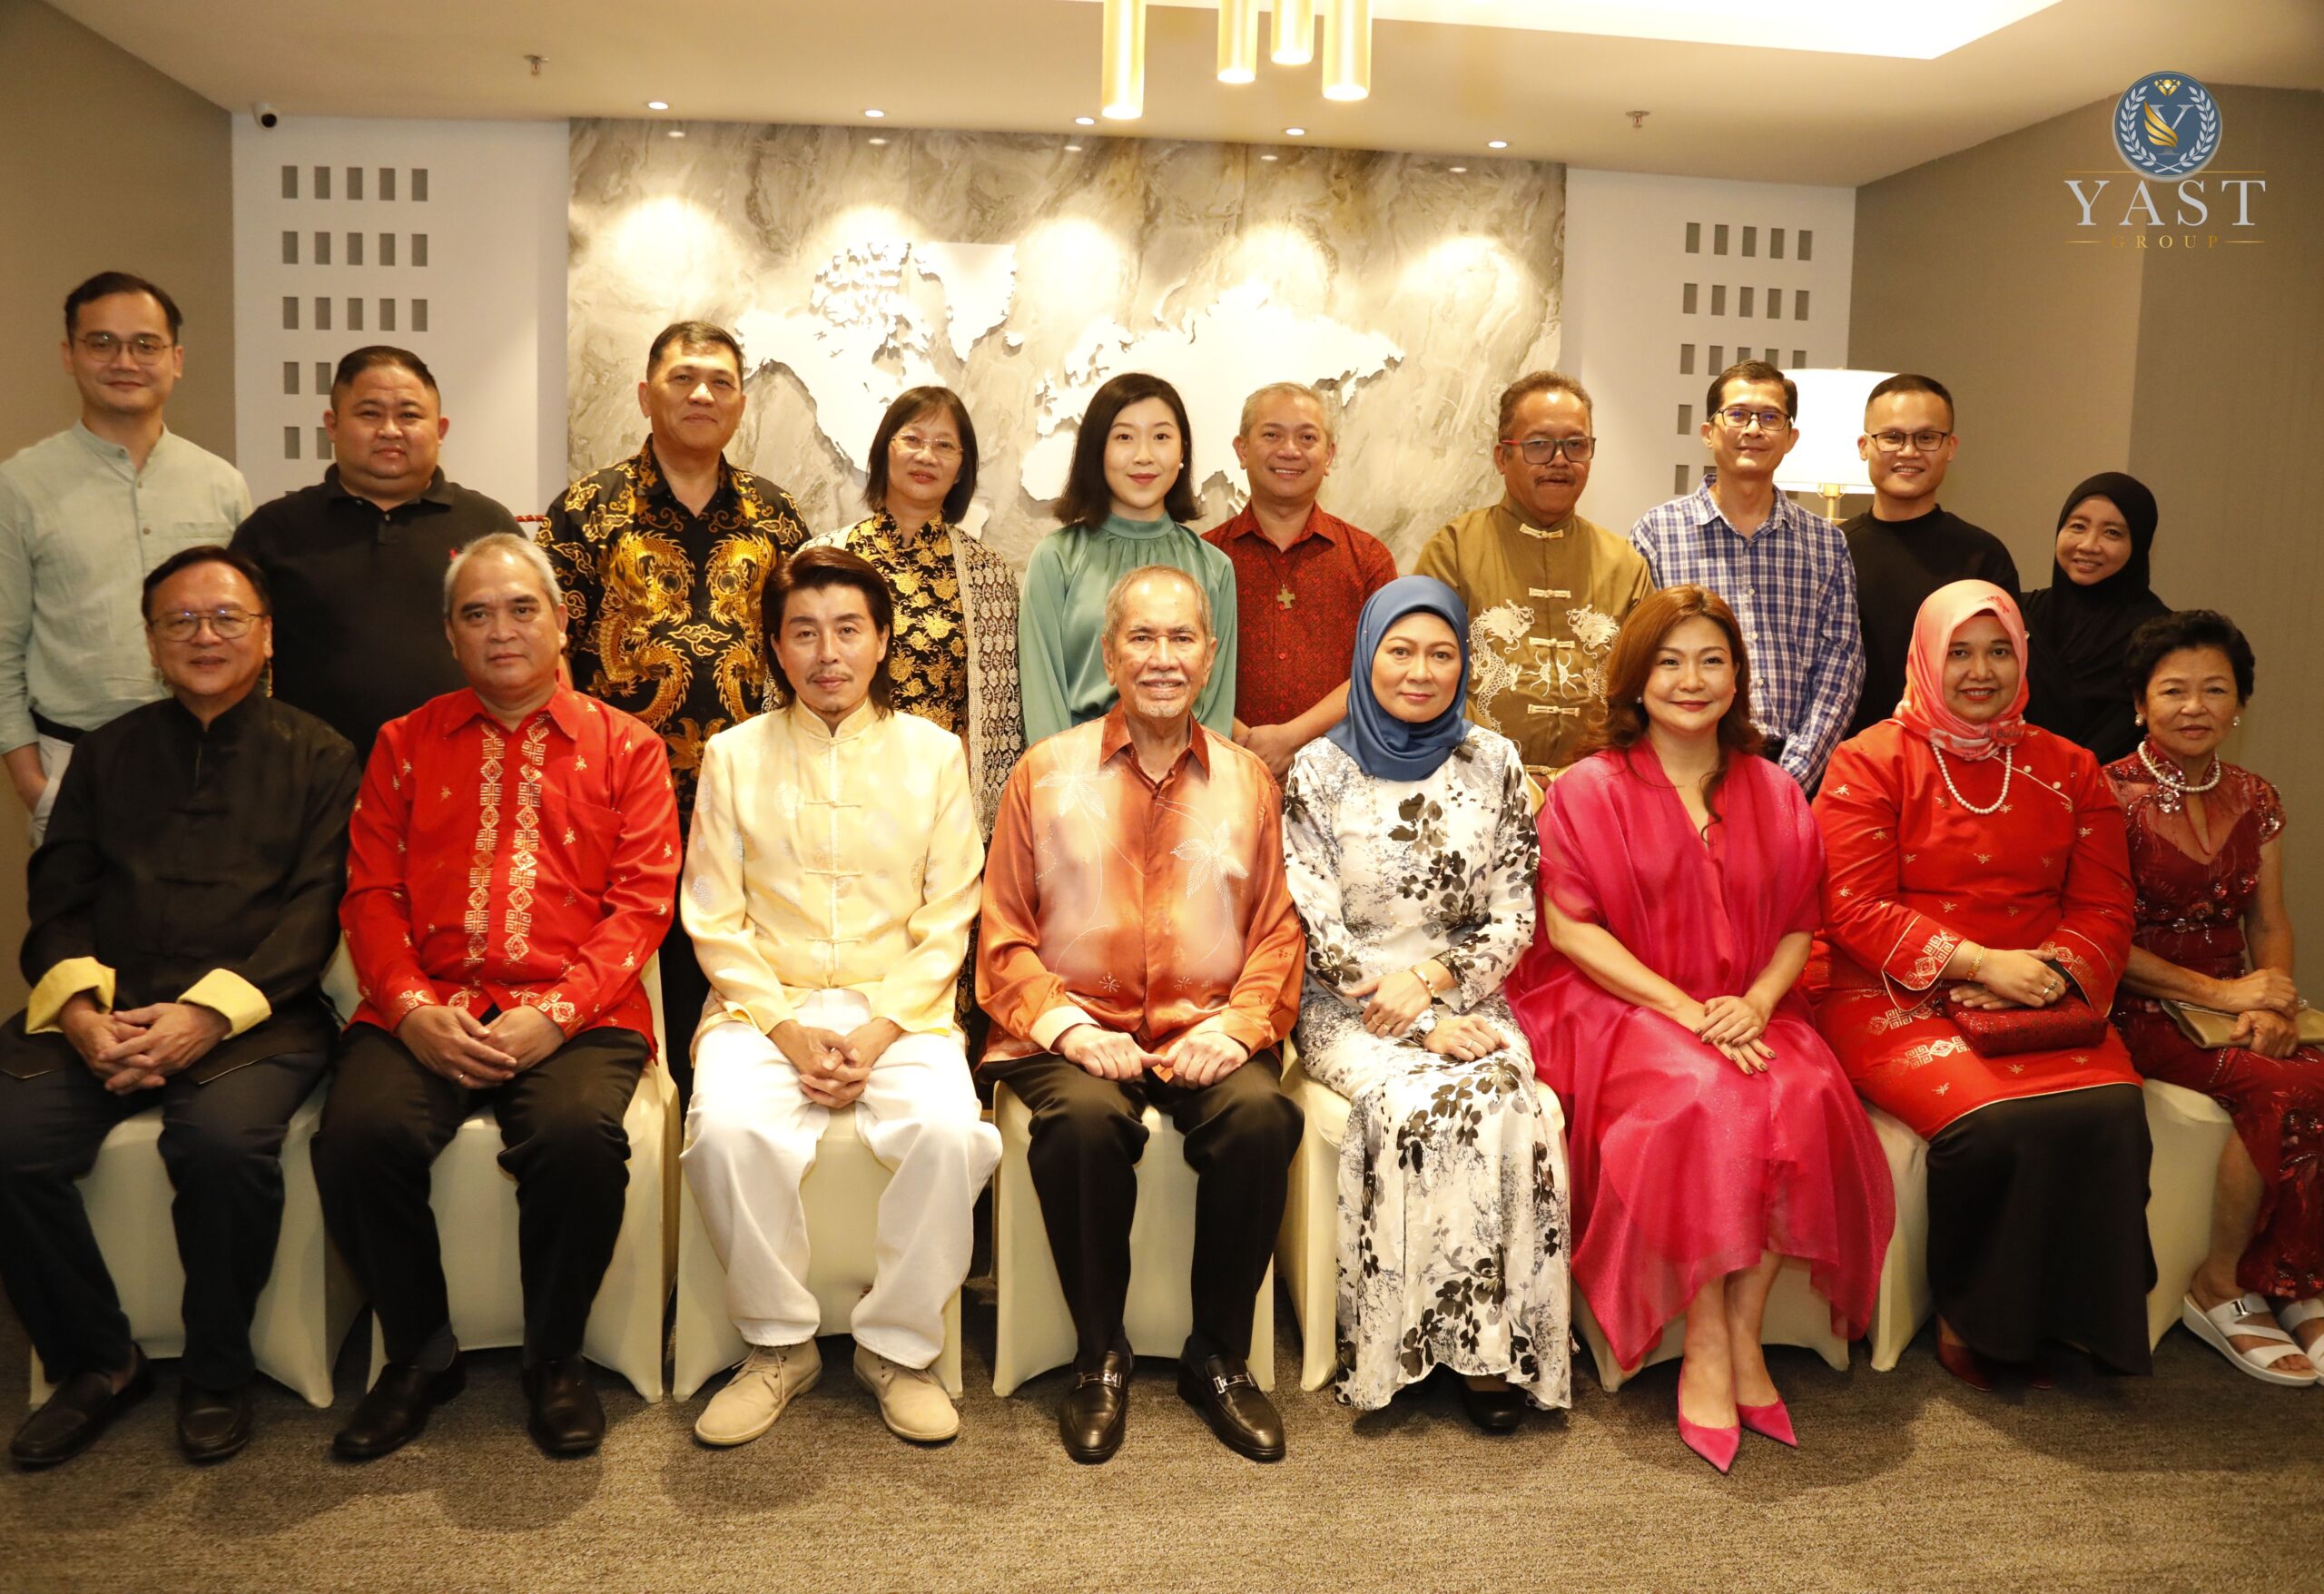 Honoring His Excellency: A Grateful Celebration of Chinese New Year at YAST Office